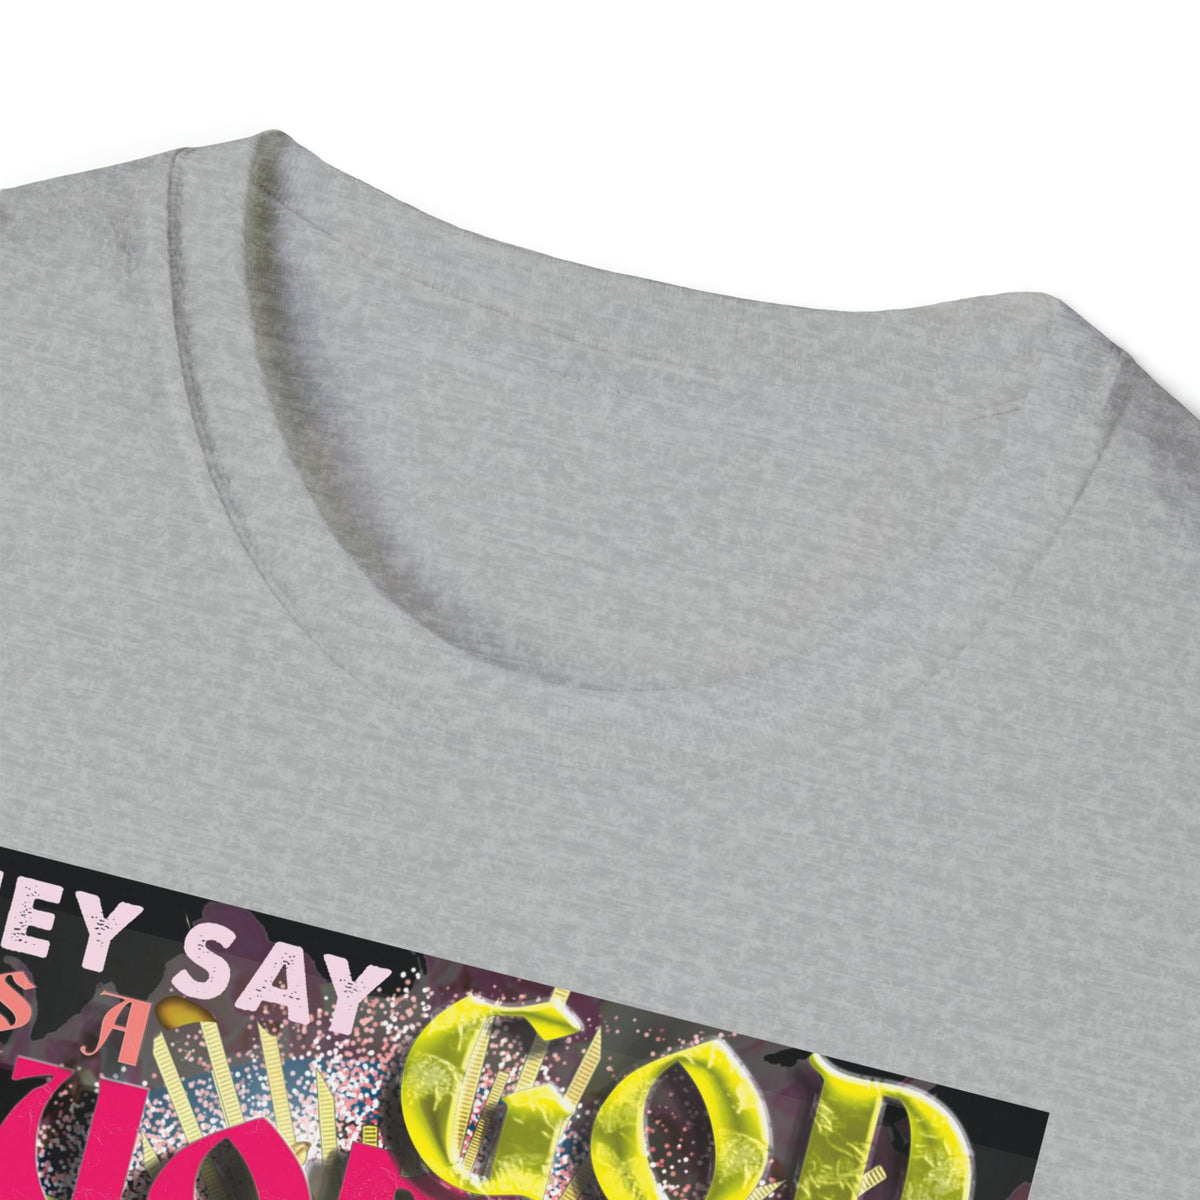 Sasha Colby - They Say God Is A Woman And I Am - Unisex Softstyle T-Shirt ,Fan Art, Drag Queen, Drag Race, Pop Culture, Comfy Tee